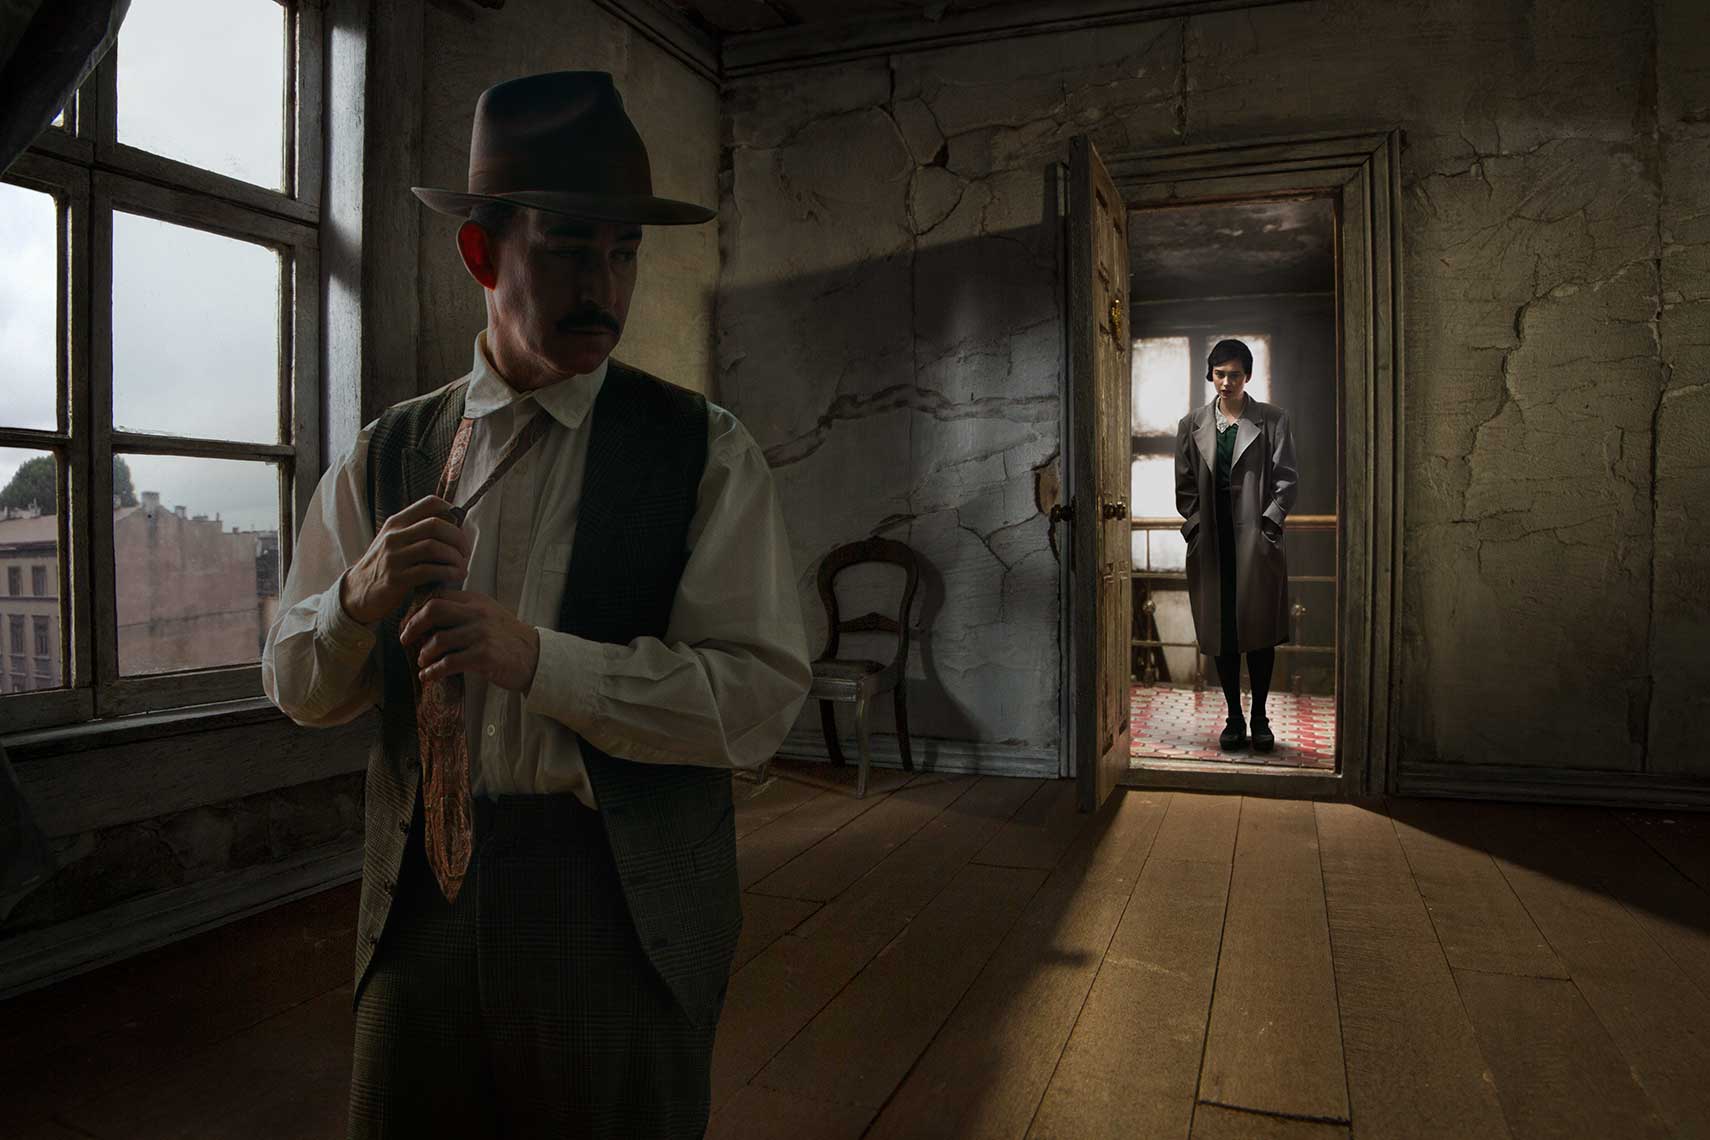 Moody painterly photomontage of a 1930s’ dingy, unfurnished decaying European apartment interior where in the foreground a shadowy male figure wearing a fedora removes his tie and turns  to look behind him at a young woman in a trench coat facing him, standing backlit in the threshold of the open door.